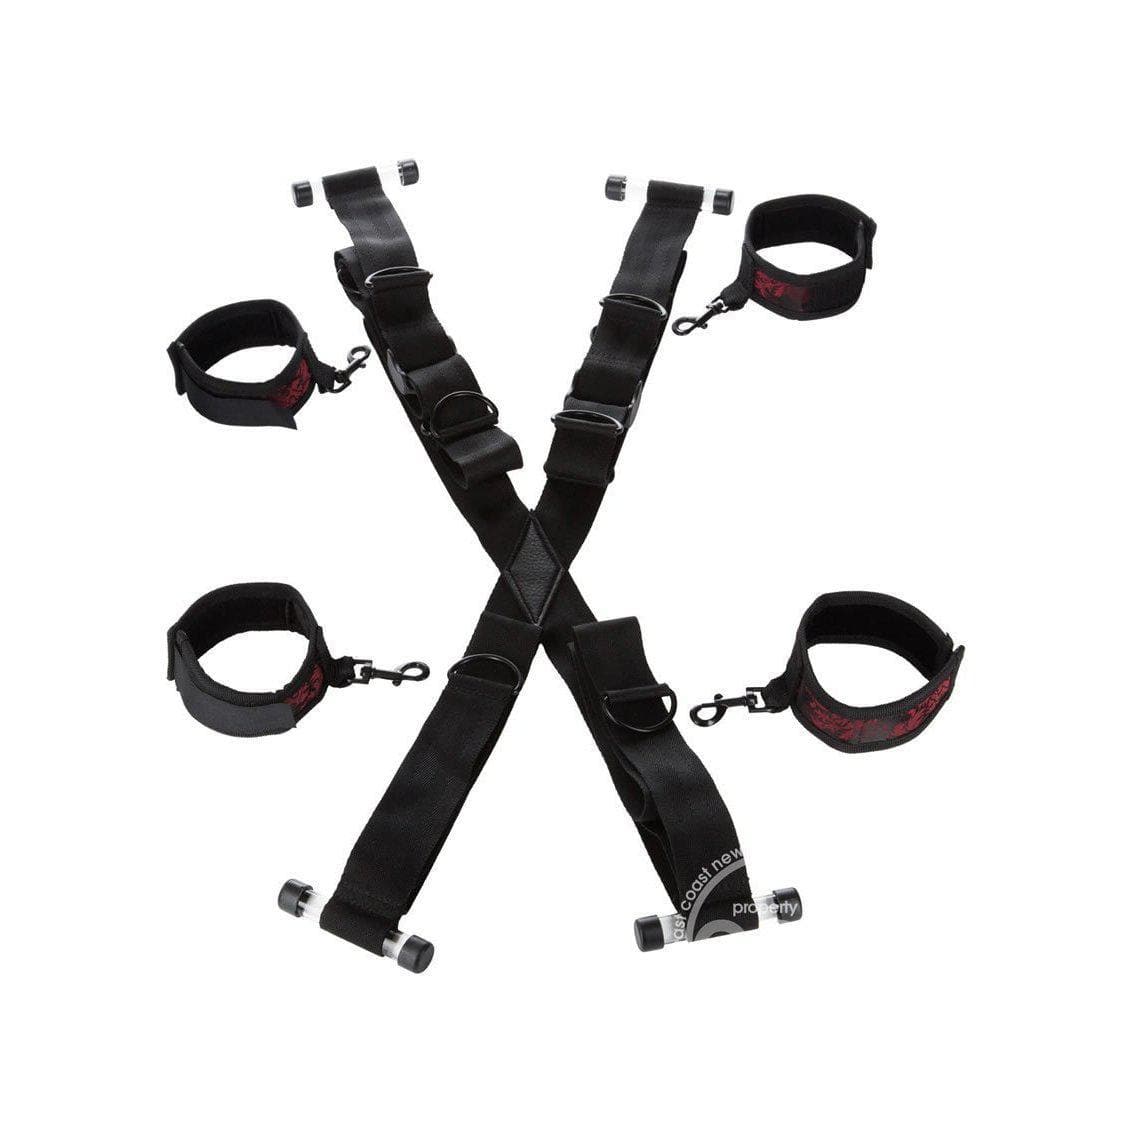 Scandal Over The Door Adjustable Cross Restraint for Couples Erotic Role Play - Romantic Blessings